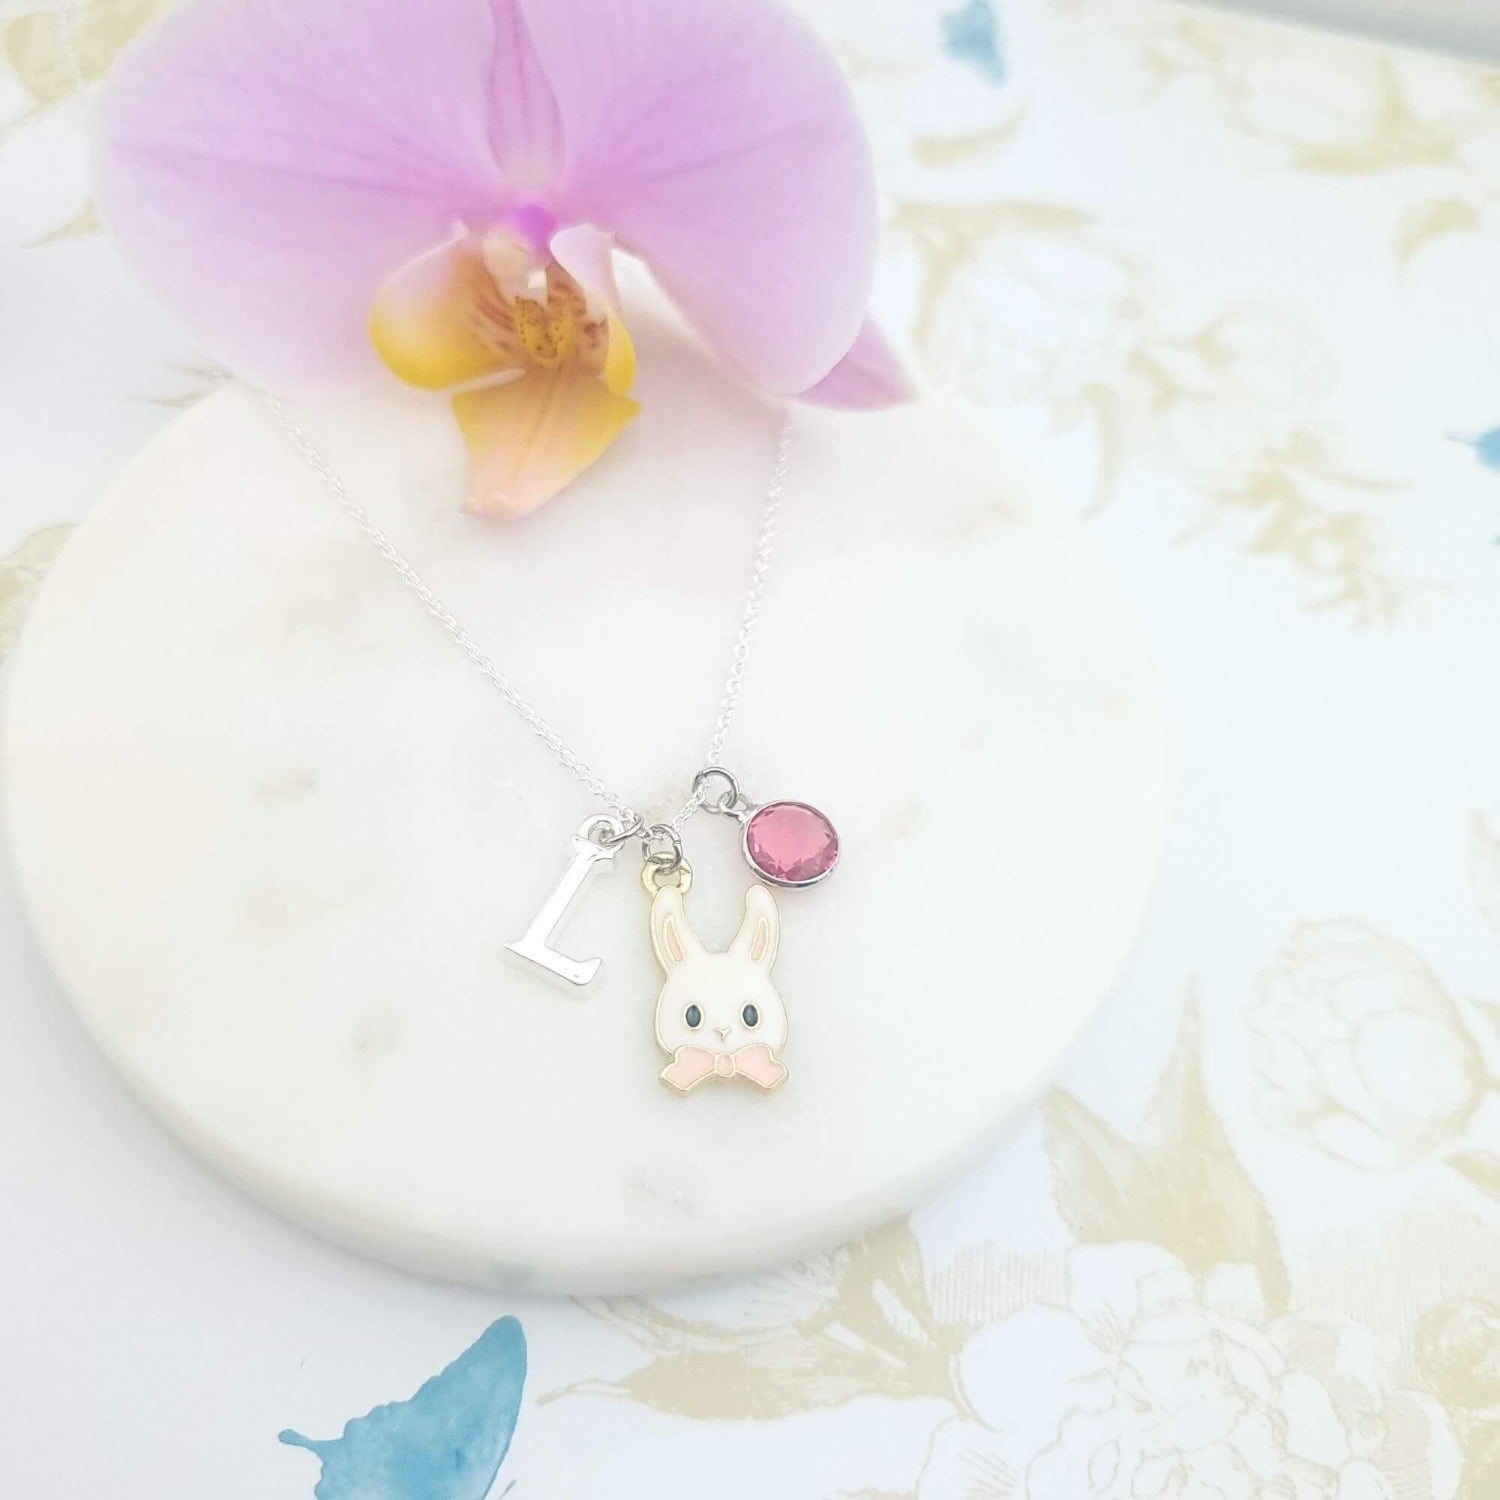 bunny necklace for children personalised with initial and birthstone